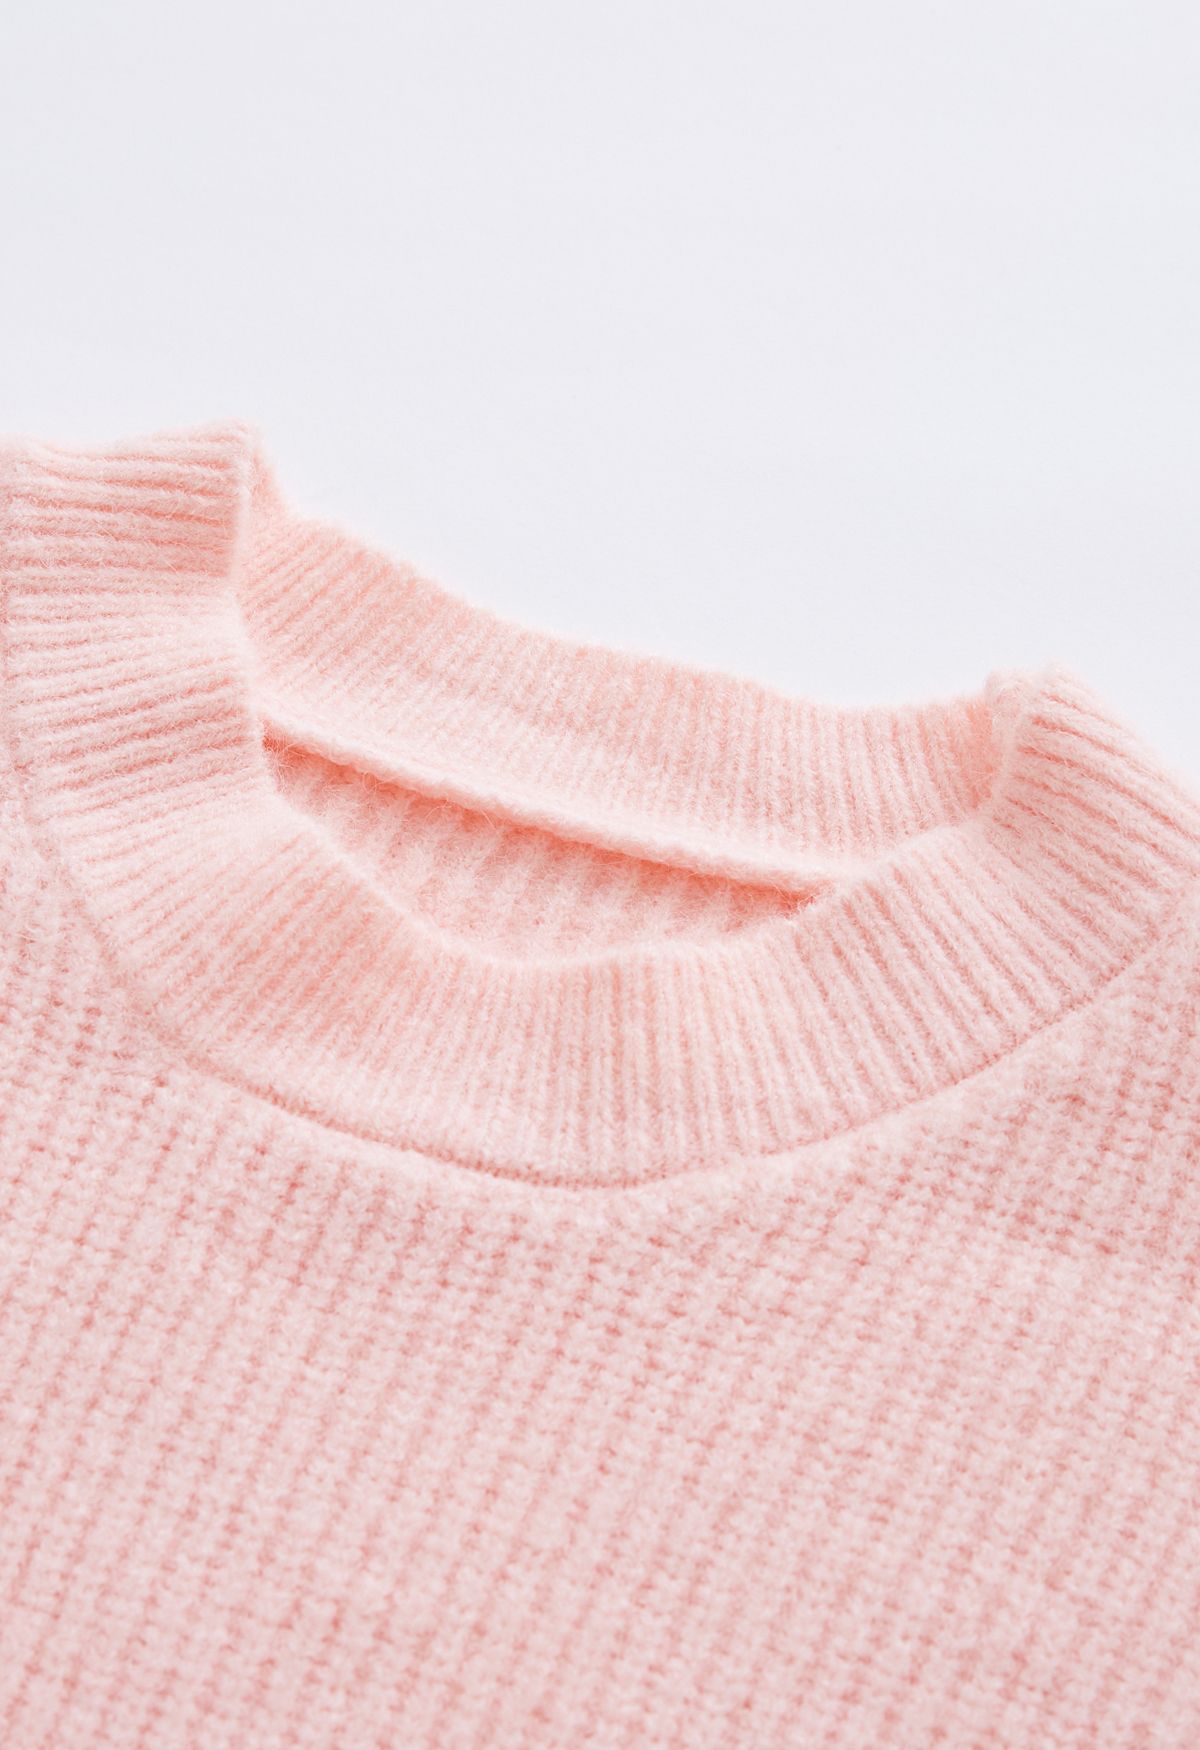 Ombre Round Neck Rib Knit Sweater in Pink